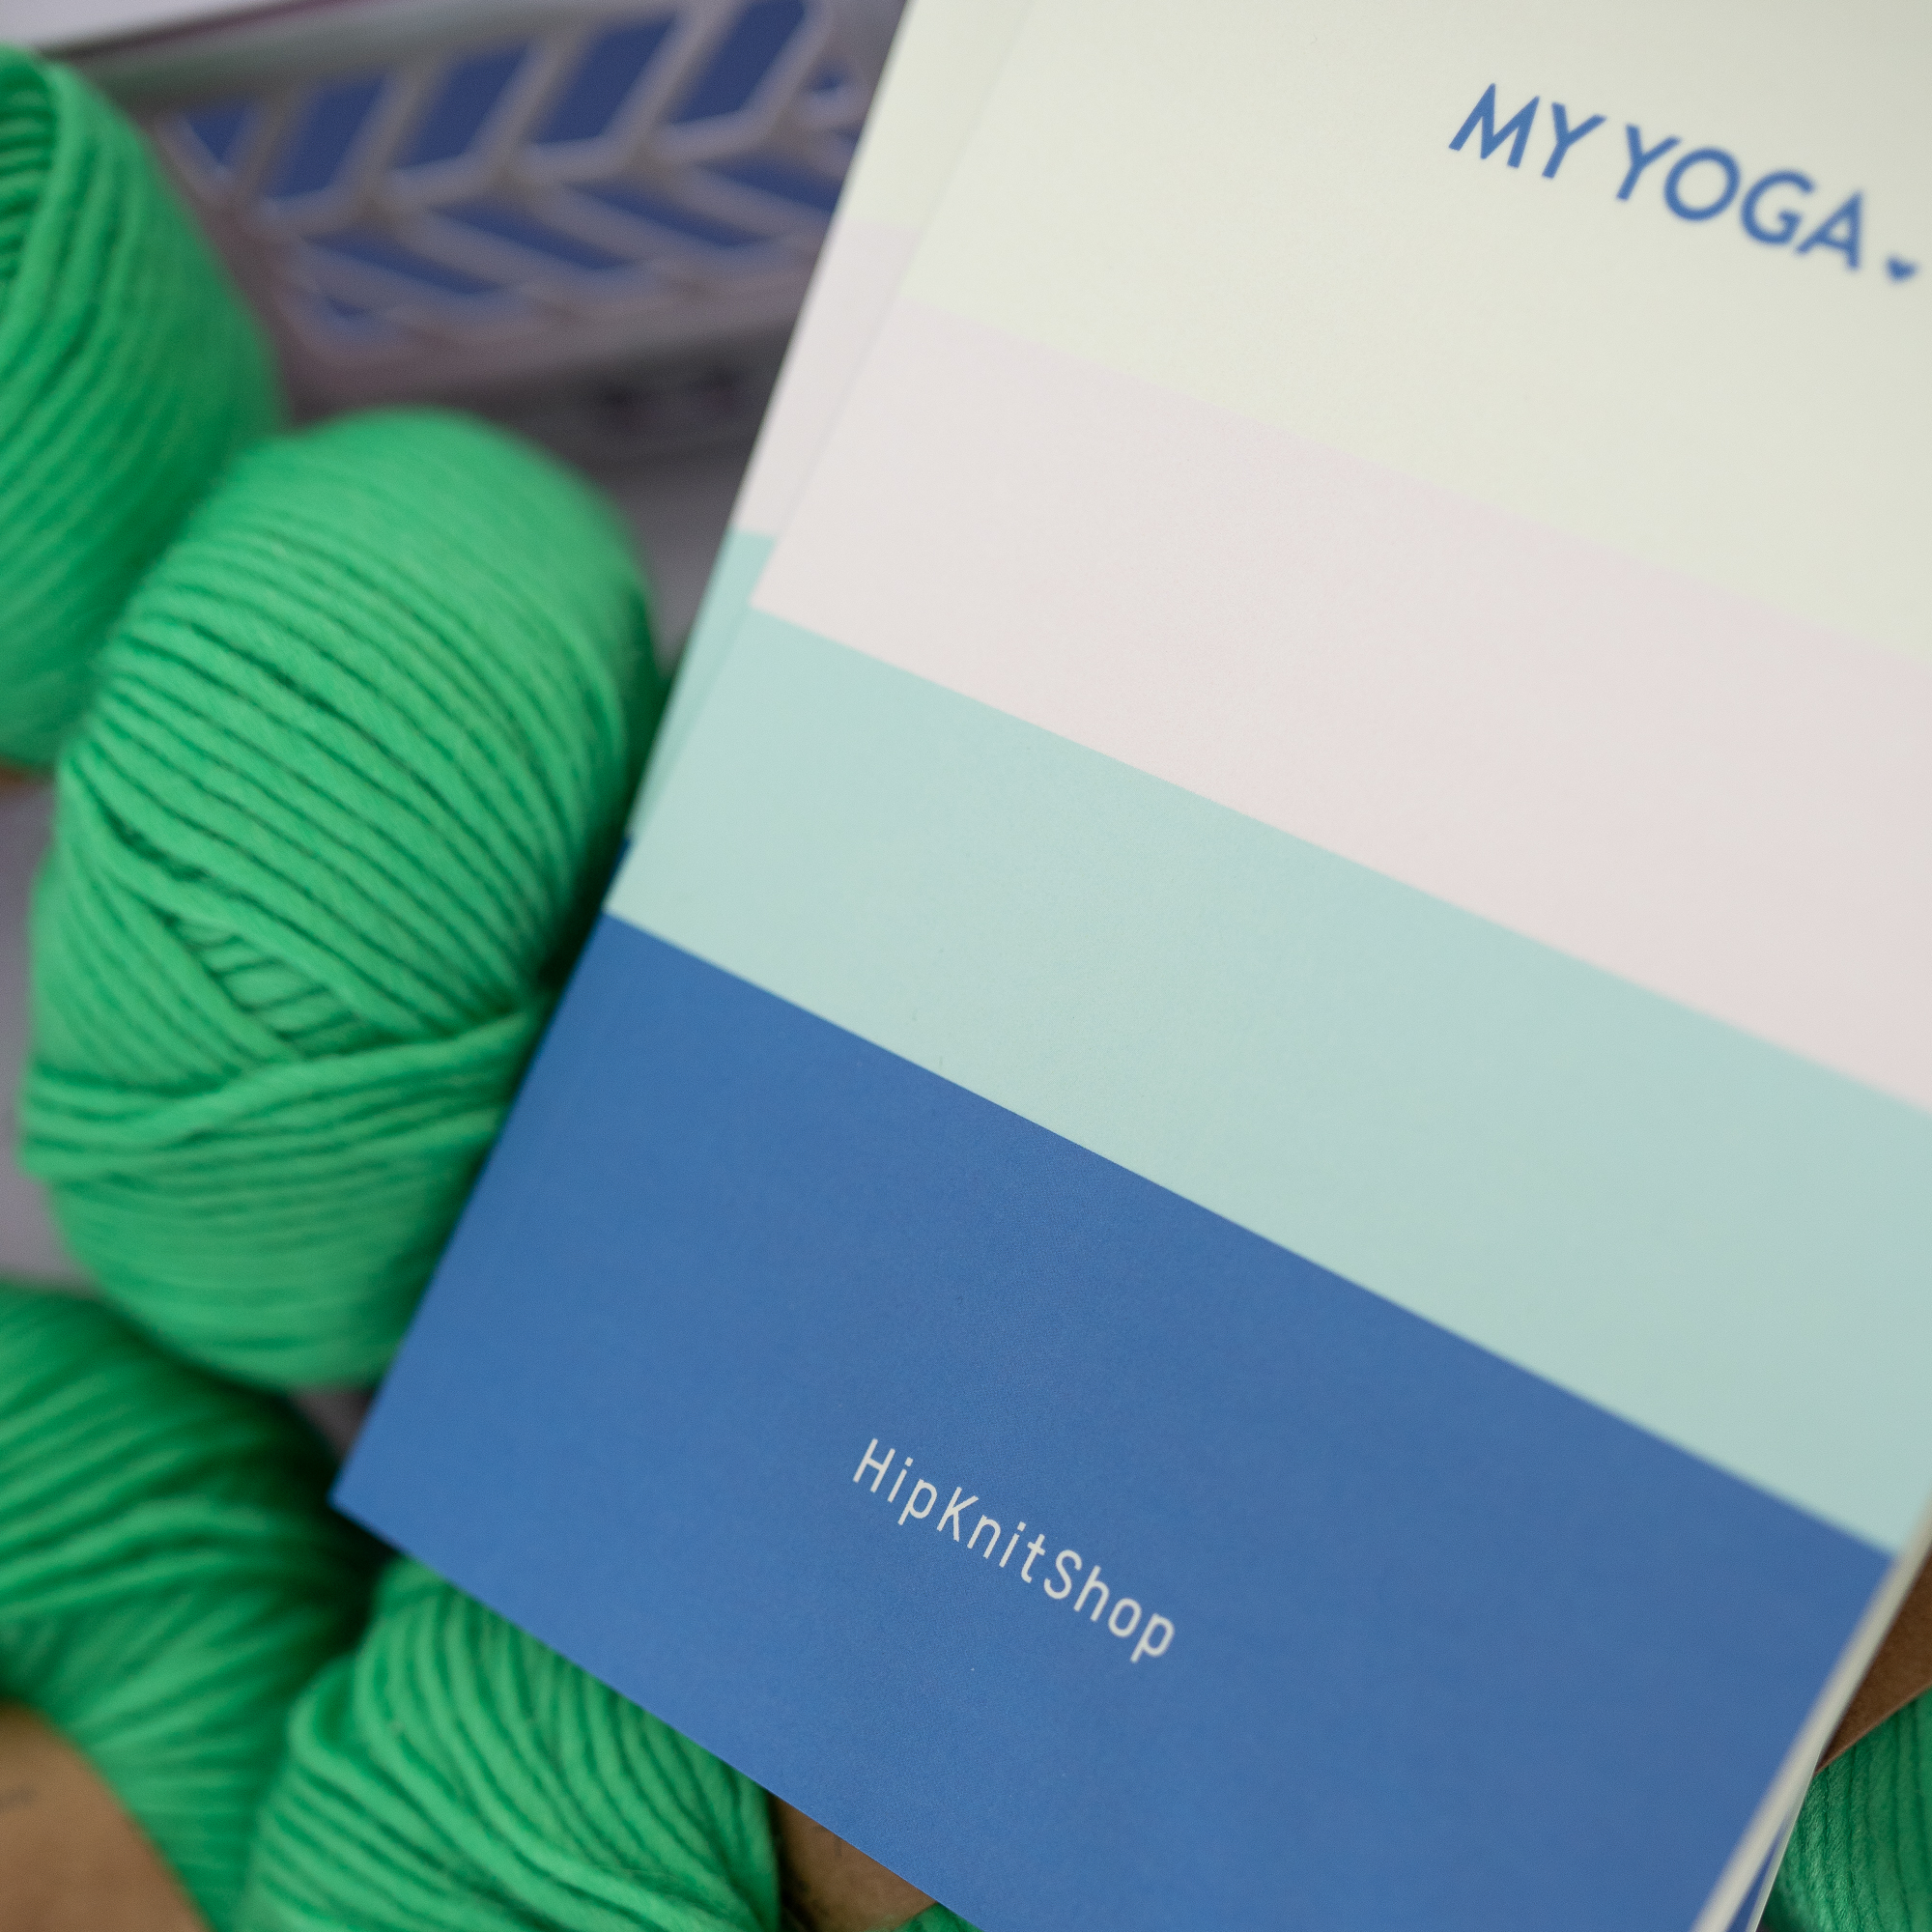  - Knitting notebook | Journal and notes for knitters | Yoga - by HipKnitShop - 09/06/2021